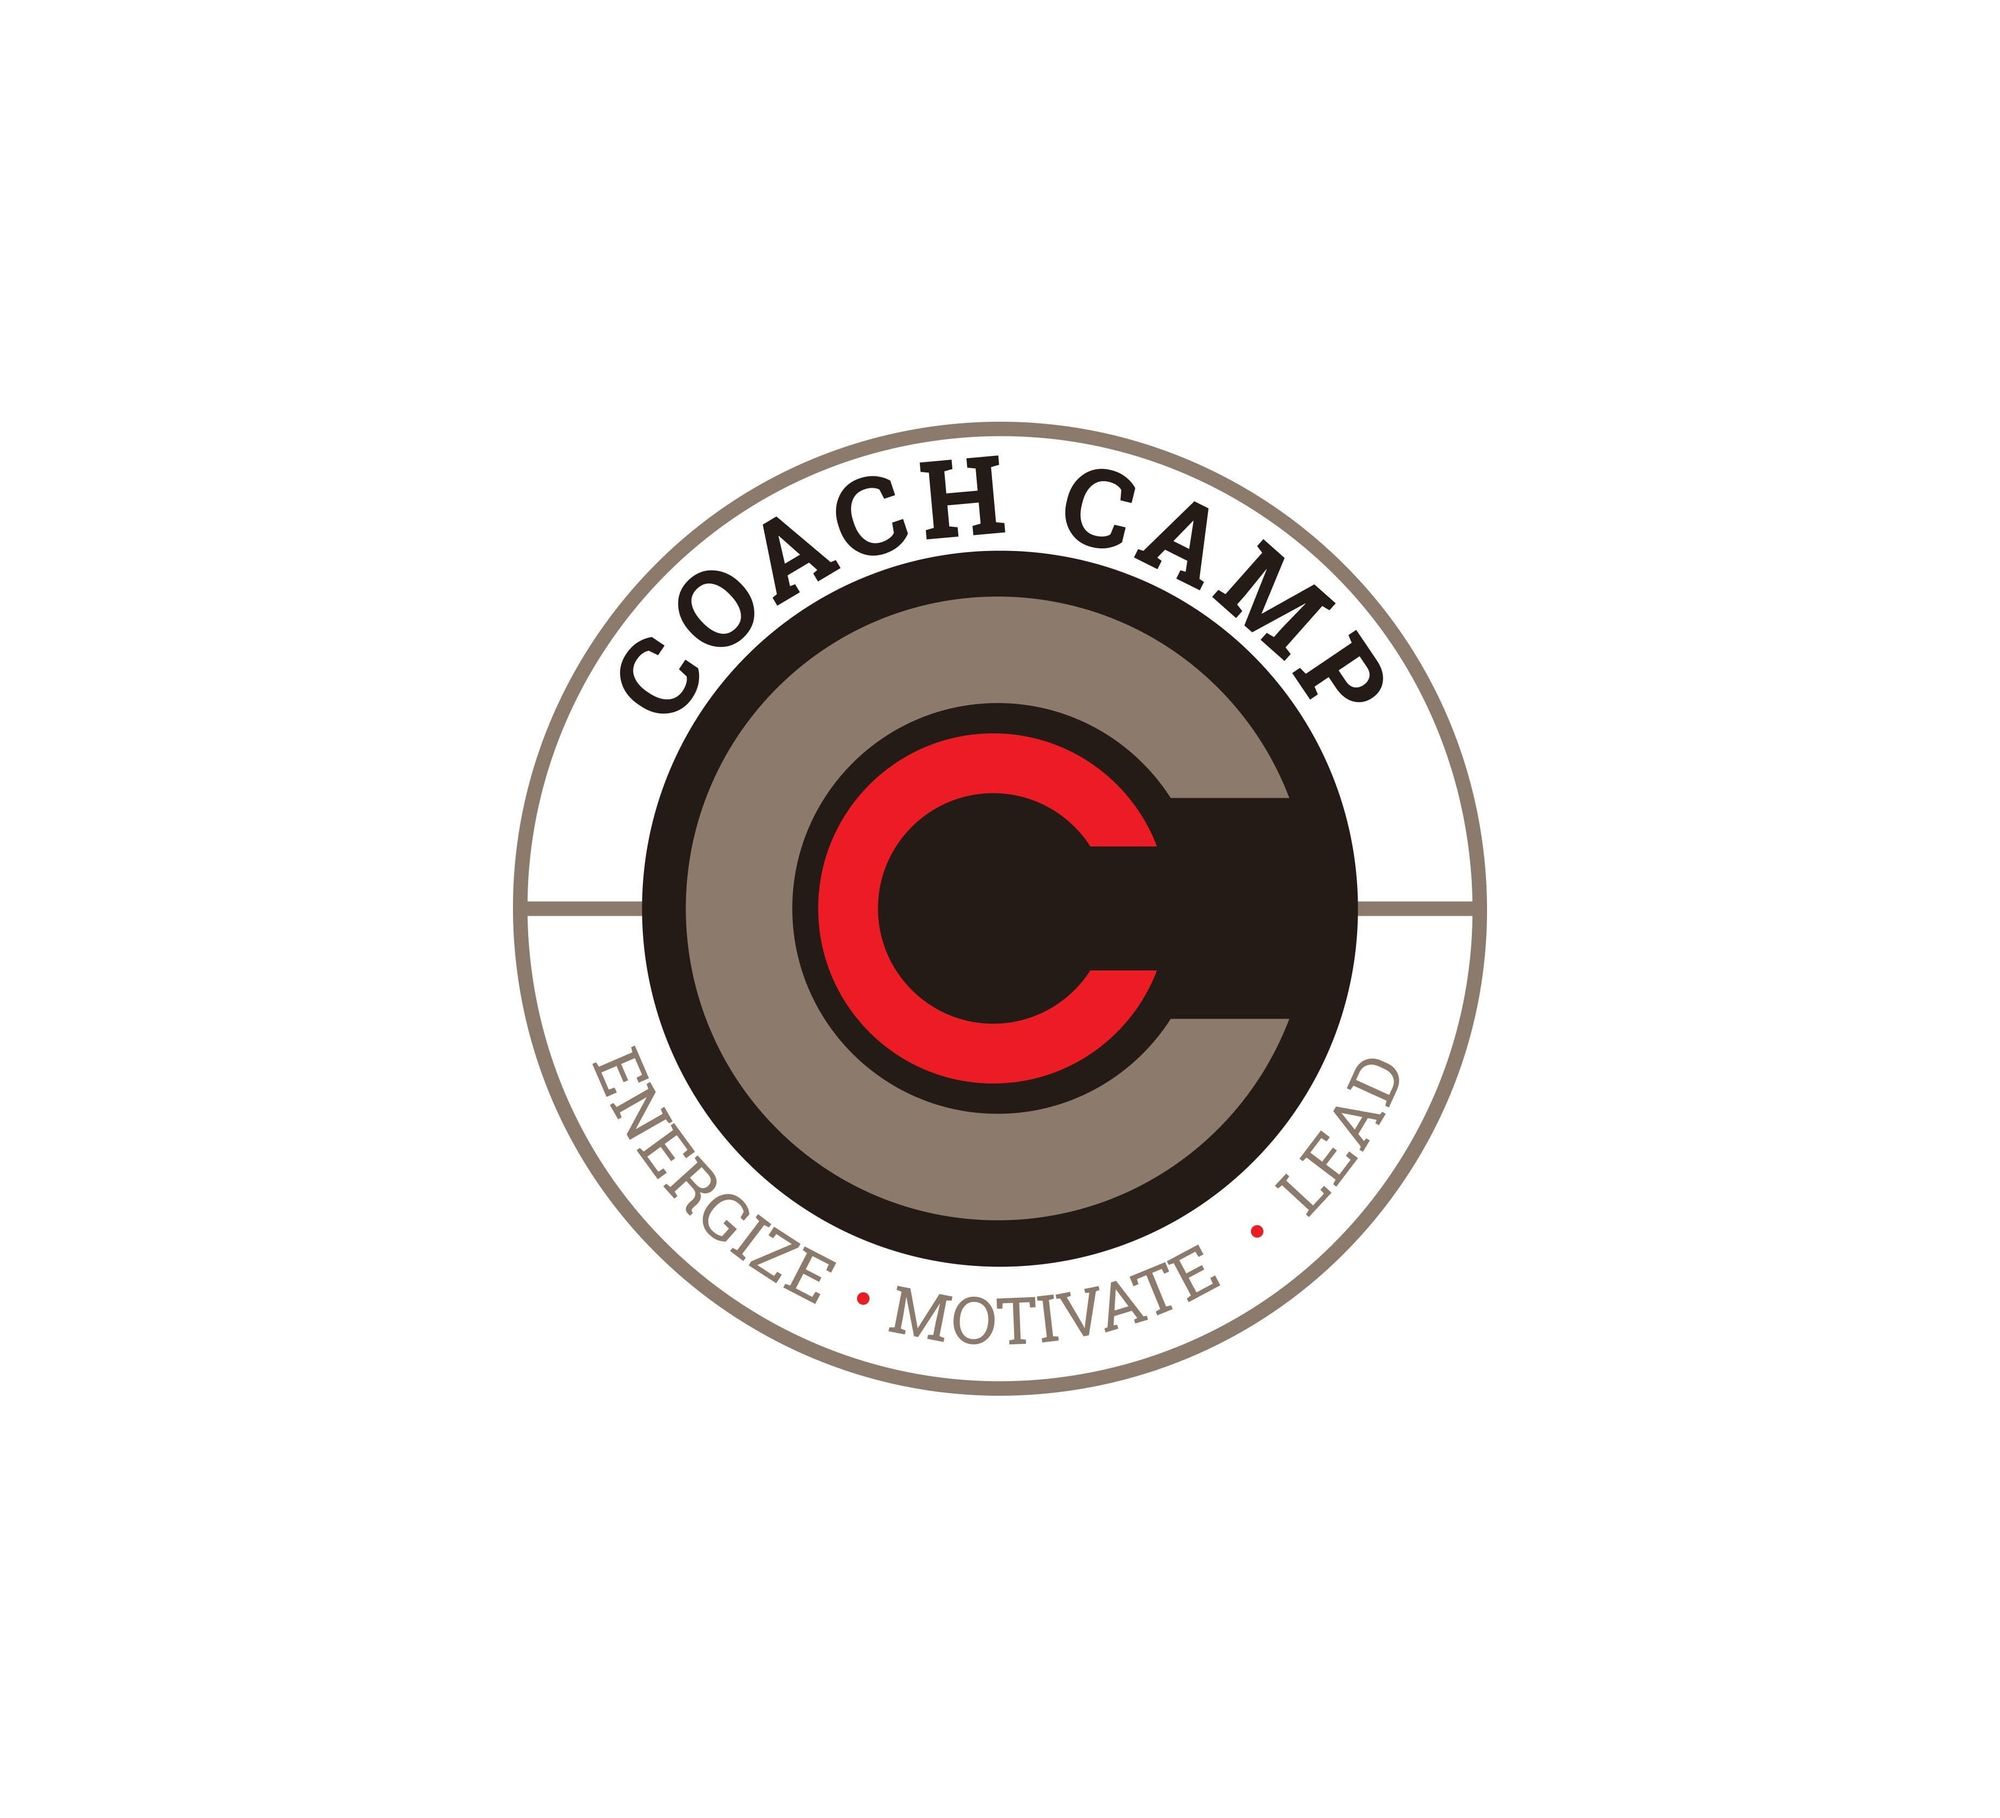 Energize, Motivate & Lead - Motivate with Coach Camp